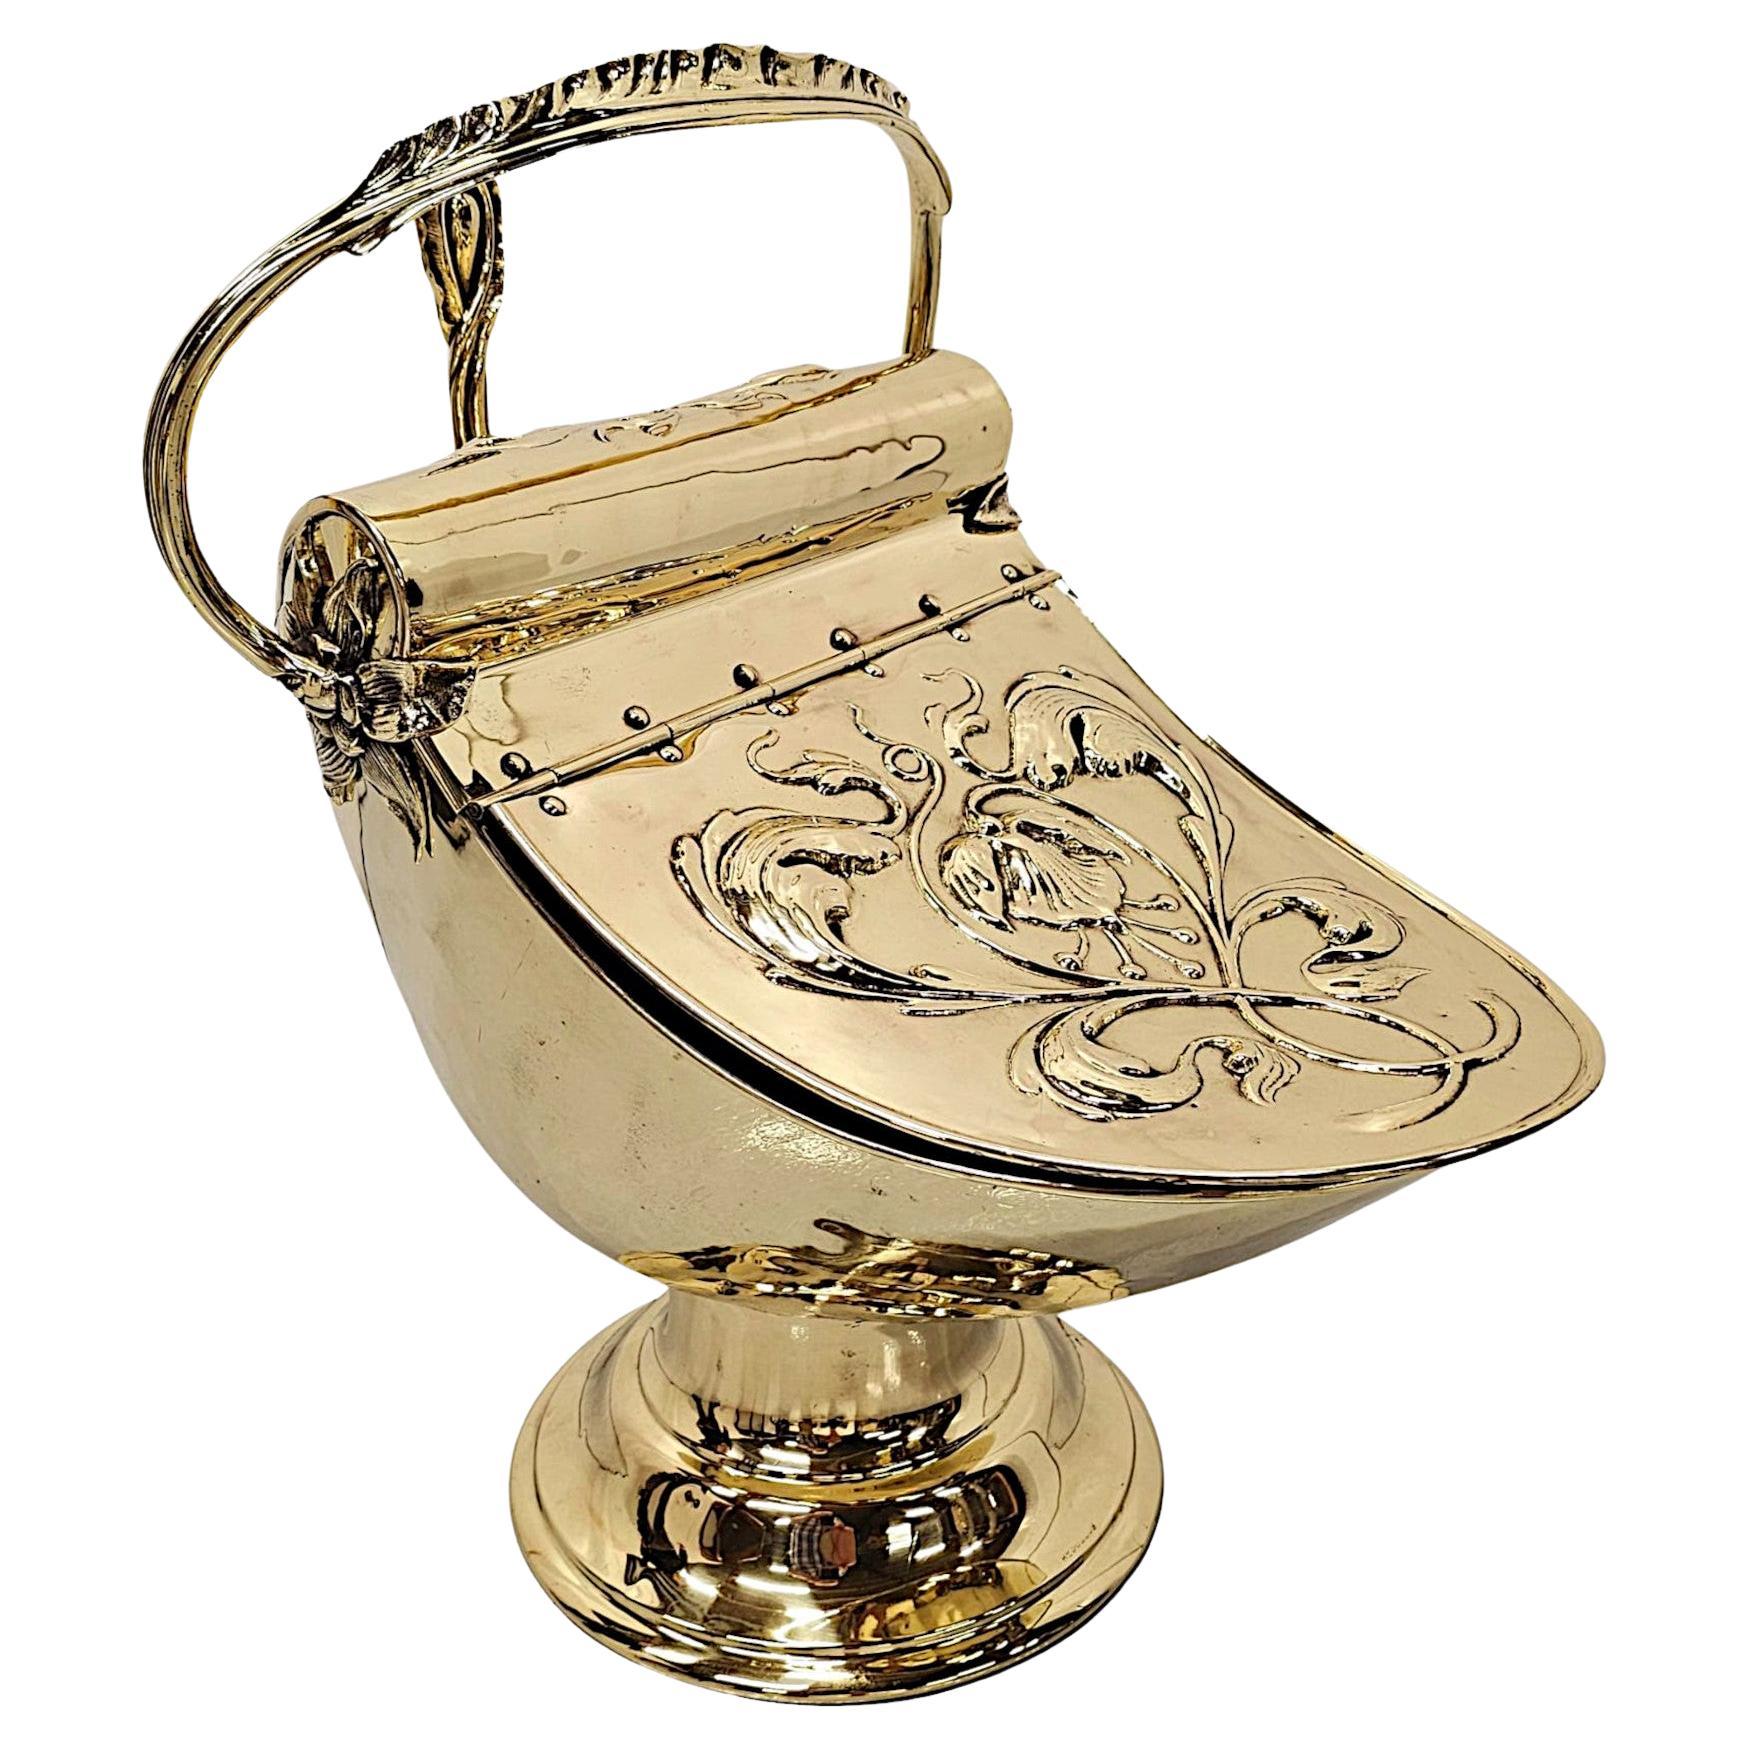 A Very Fine 19th Century Polished Brass Coal Scuttle